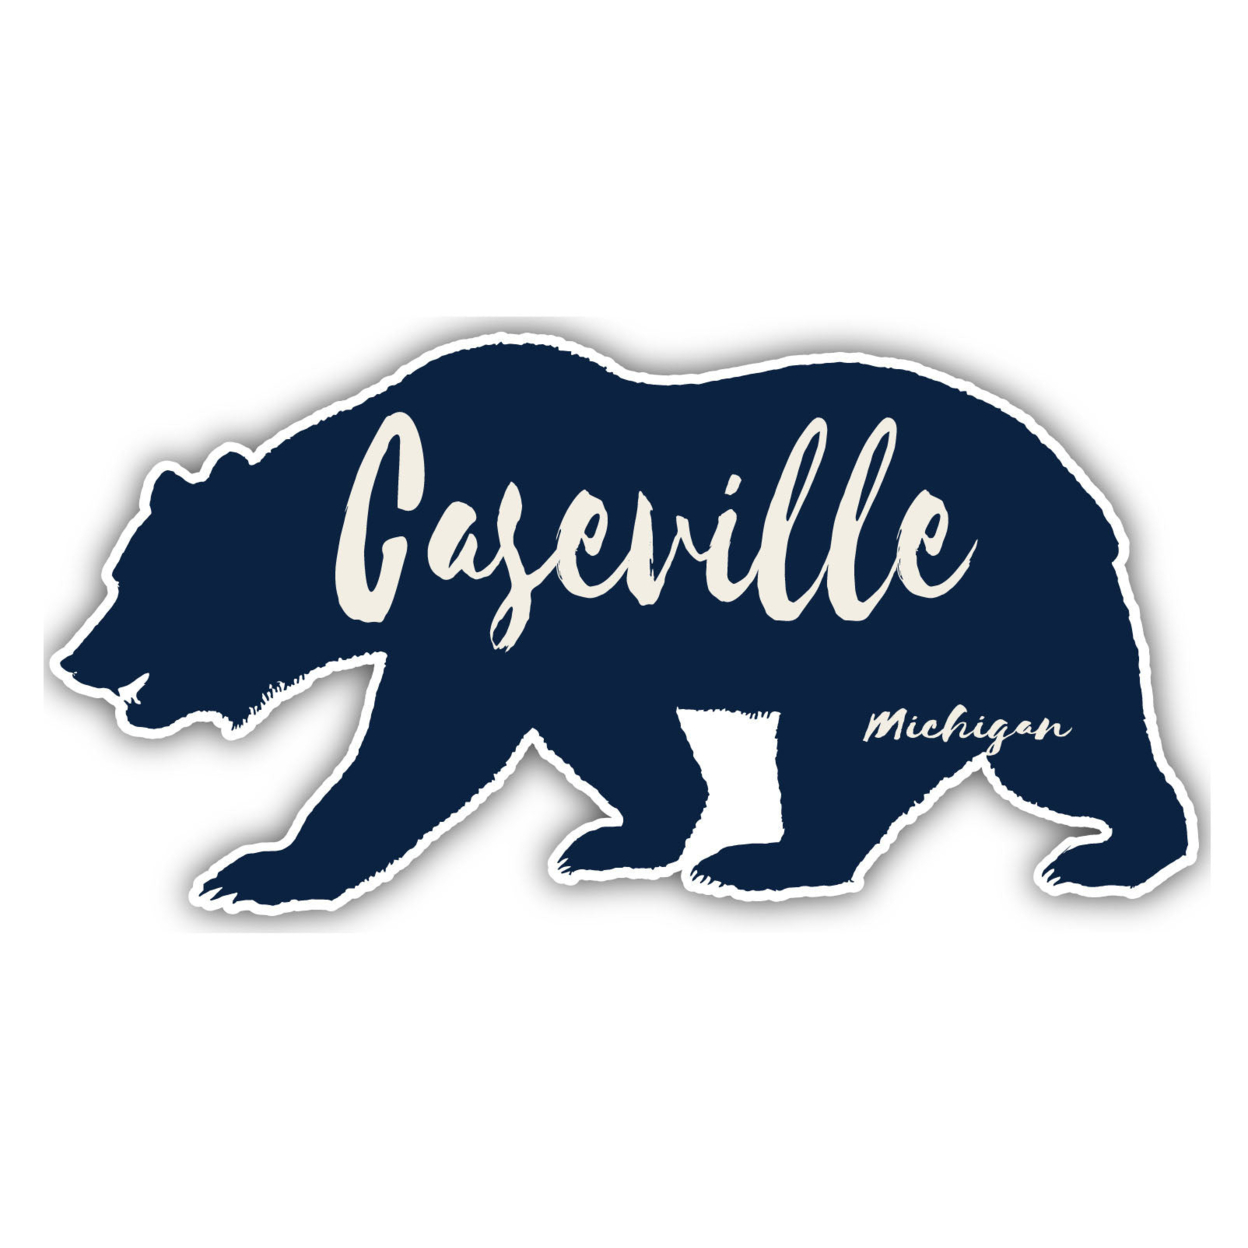 Caseville Michigan Souvenir Decorative Stickers (Choose Theme And Size) - 4-Pack, 10-Inch, Great Outdoors